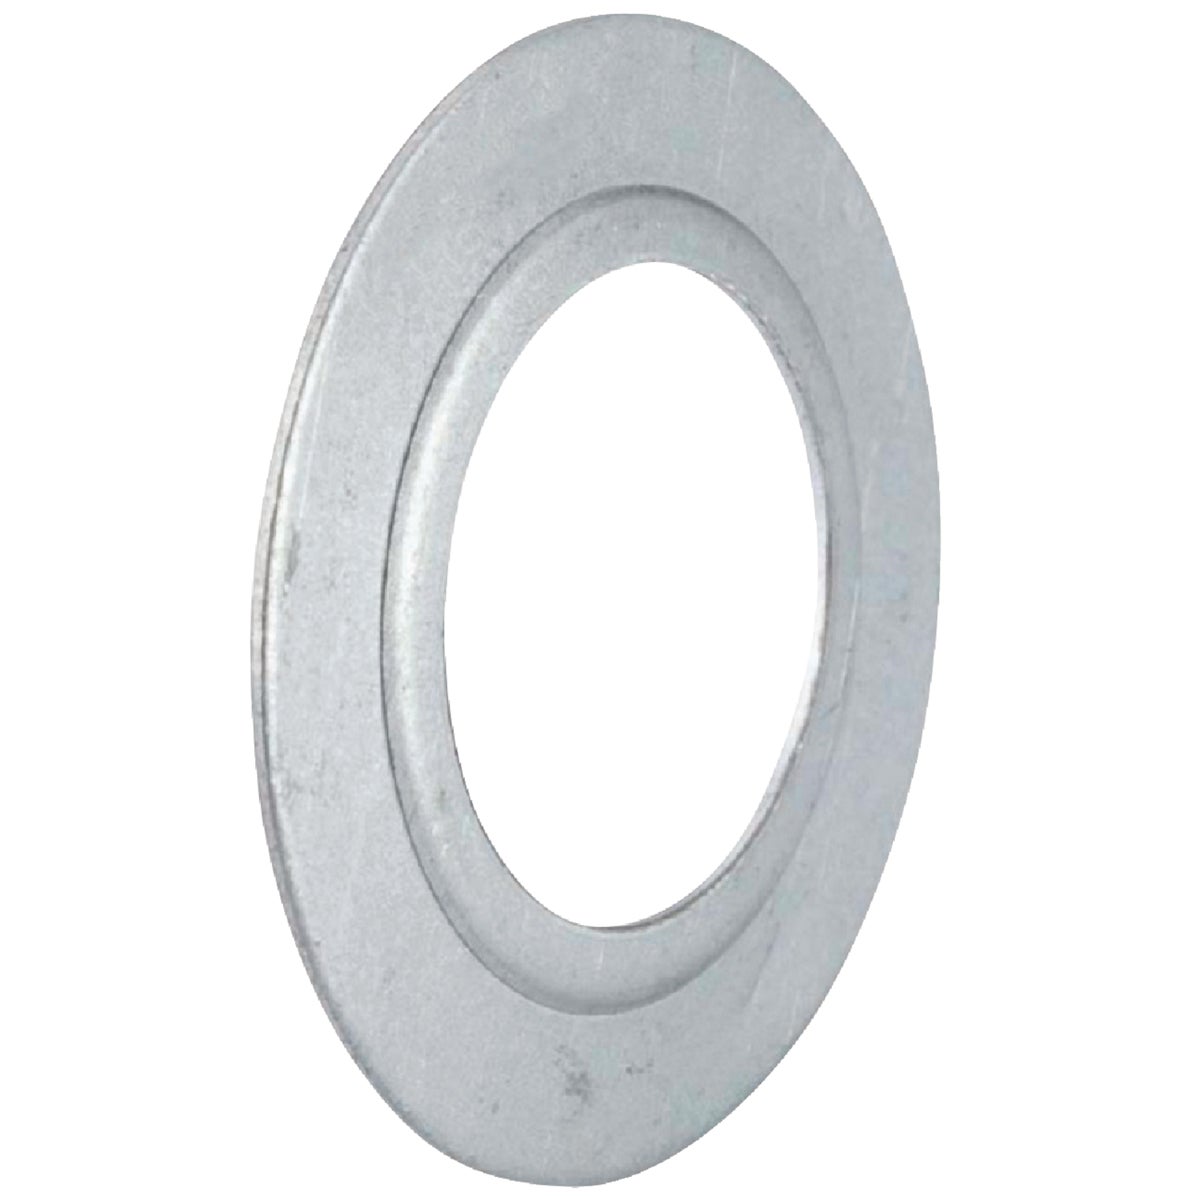 Halex 1-1/2 In. to 1-1/4 In. Plated Steel Rigid Reducing Washer (2-Pack)